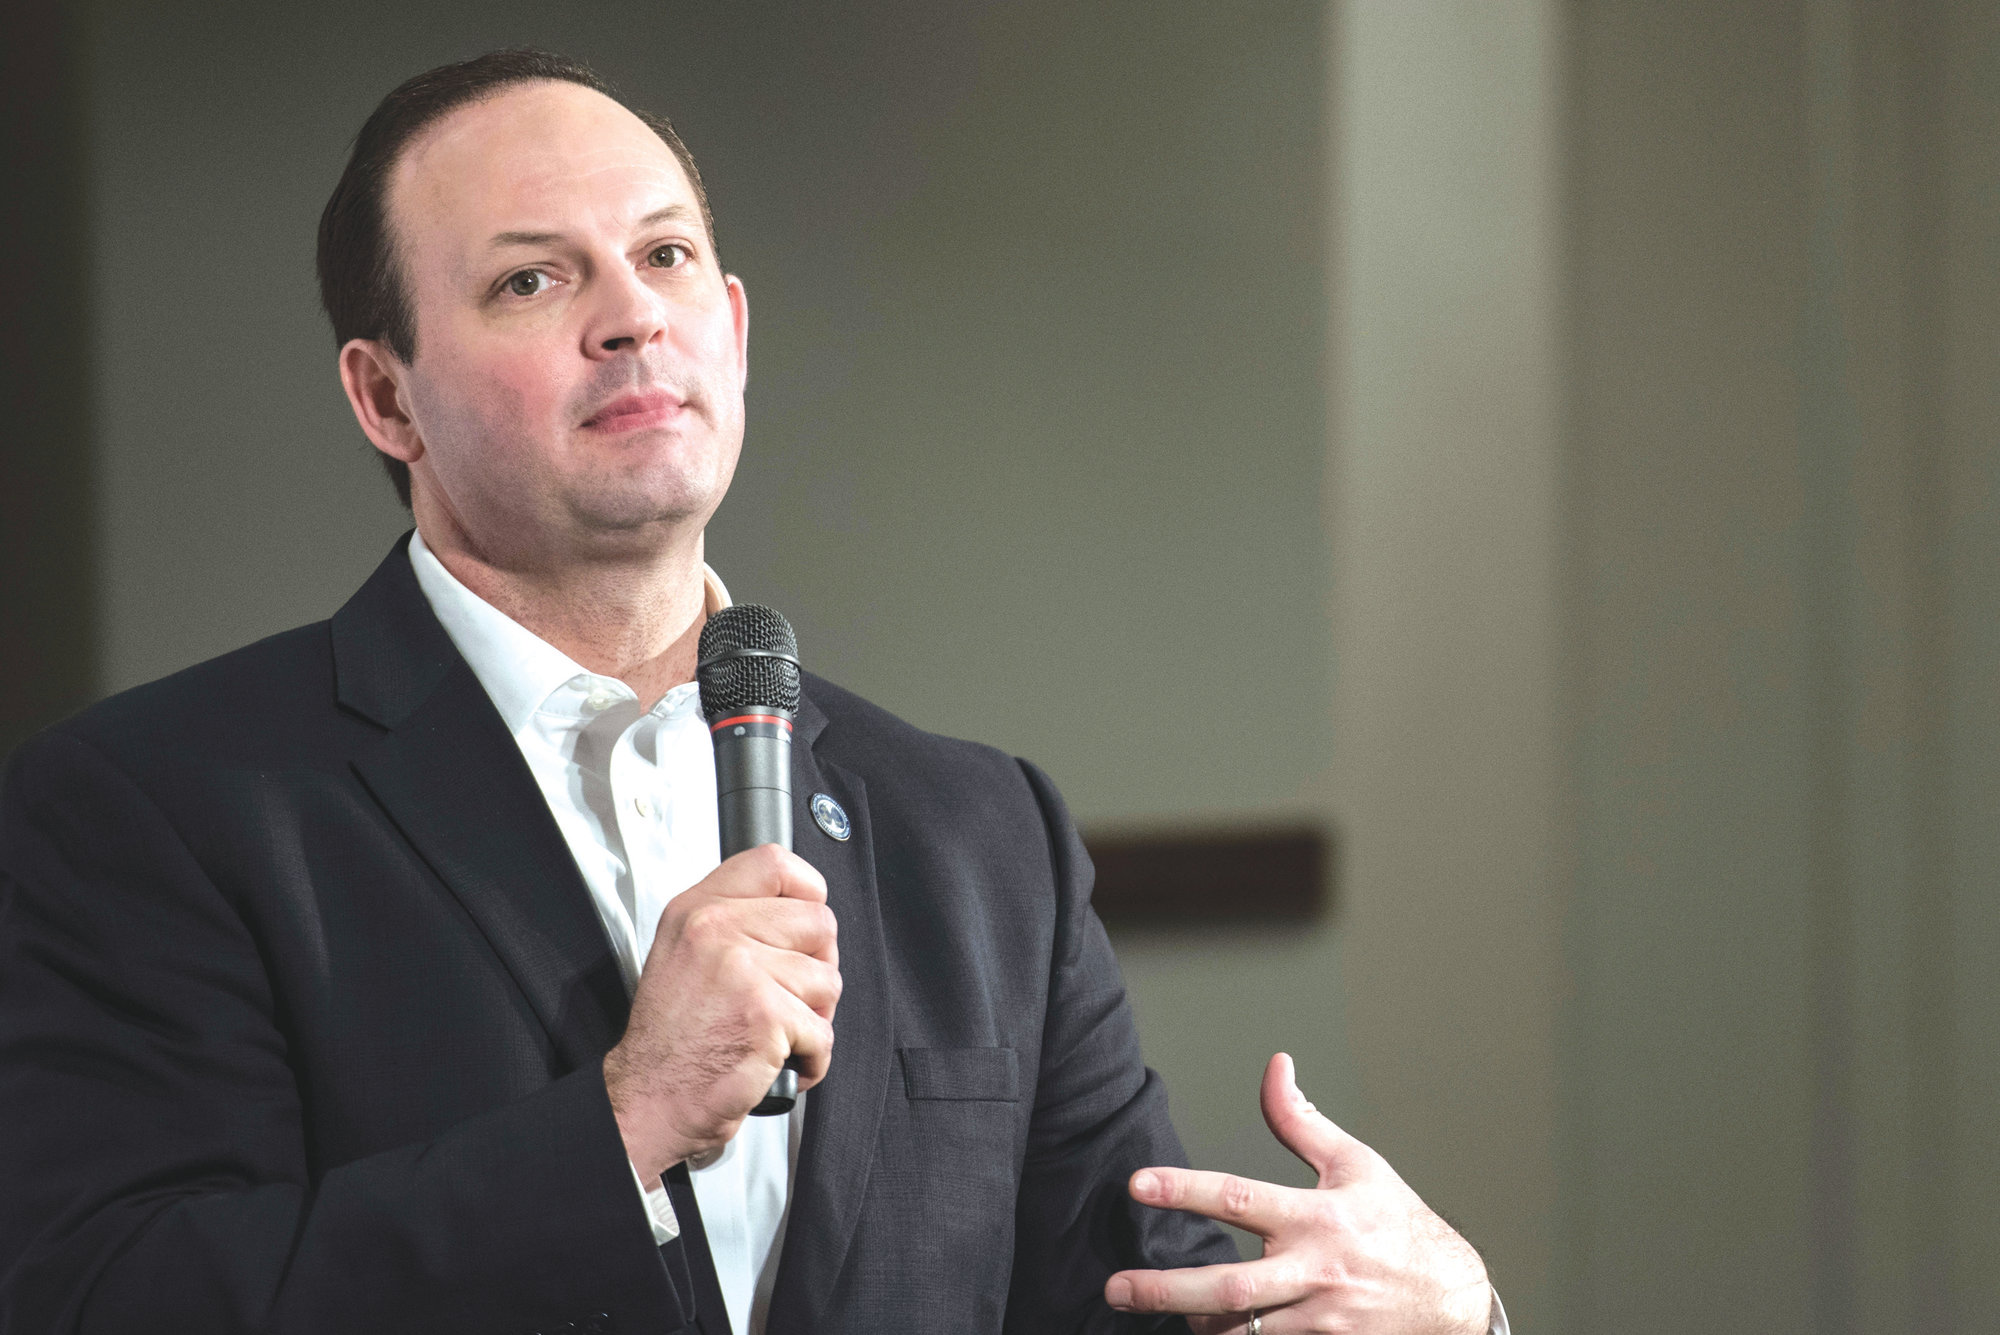 South Carolina Attorney General Alan Wilson speaks to the crowd at a Conservative Leadership Project presidential forum in Columbia in January 2016. On Jan 7, Wilson said he petitioned to join a lawsuit already filed by 16 South Carolina cities and towns opposing the issuance of permits for the use of seismic air guns, a move that's also received the support of the state's governor, Henry McMaster.